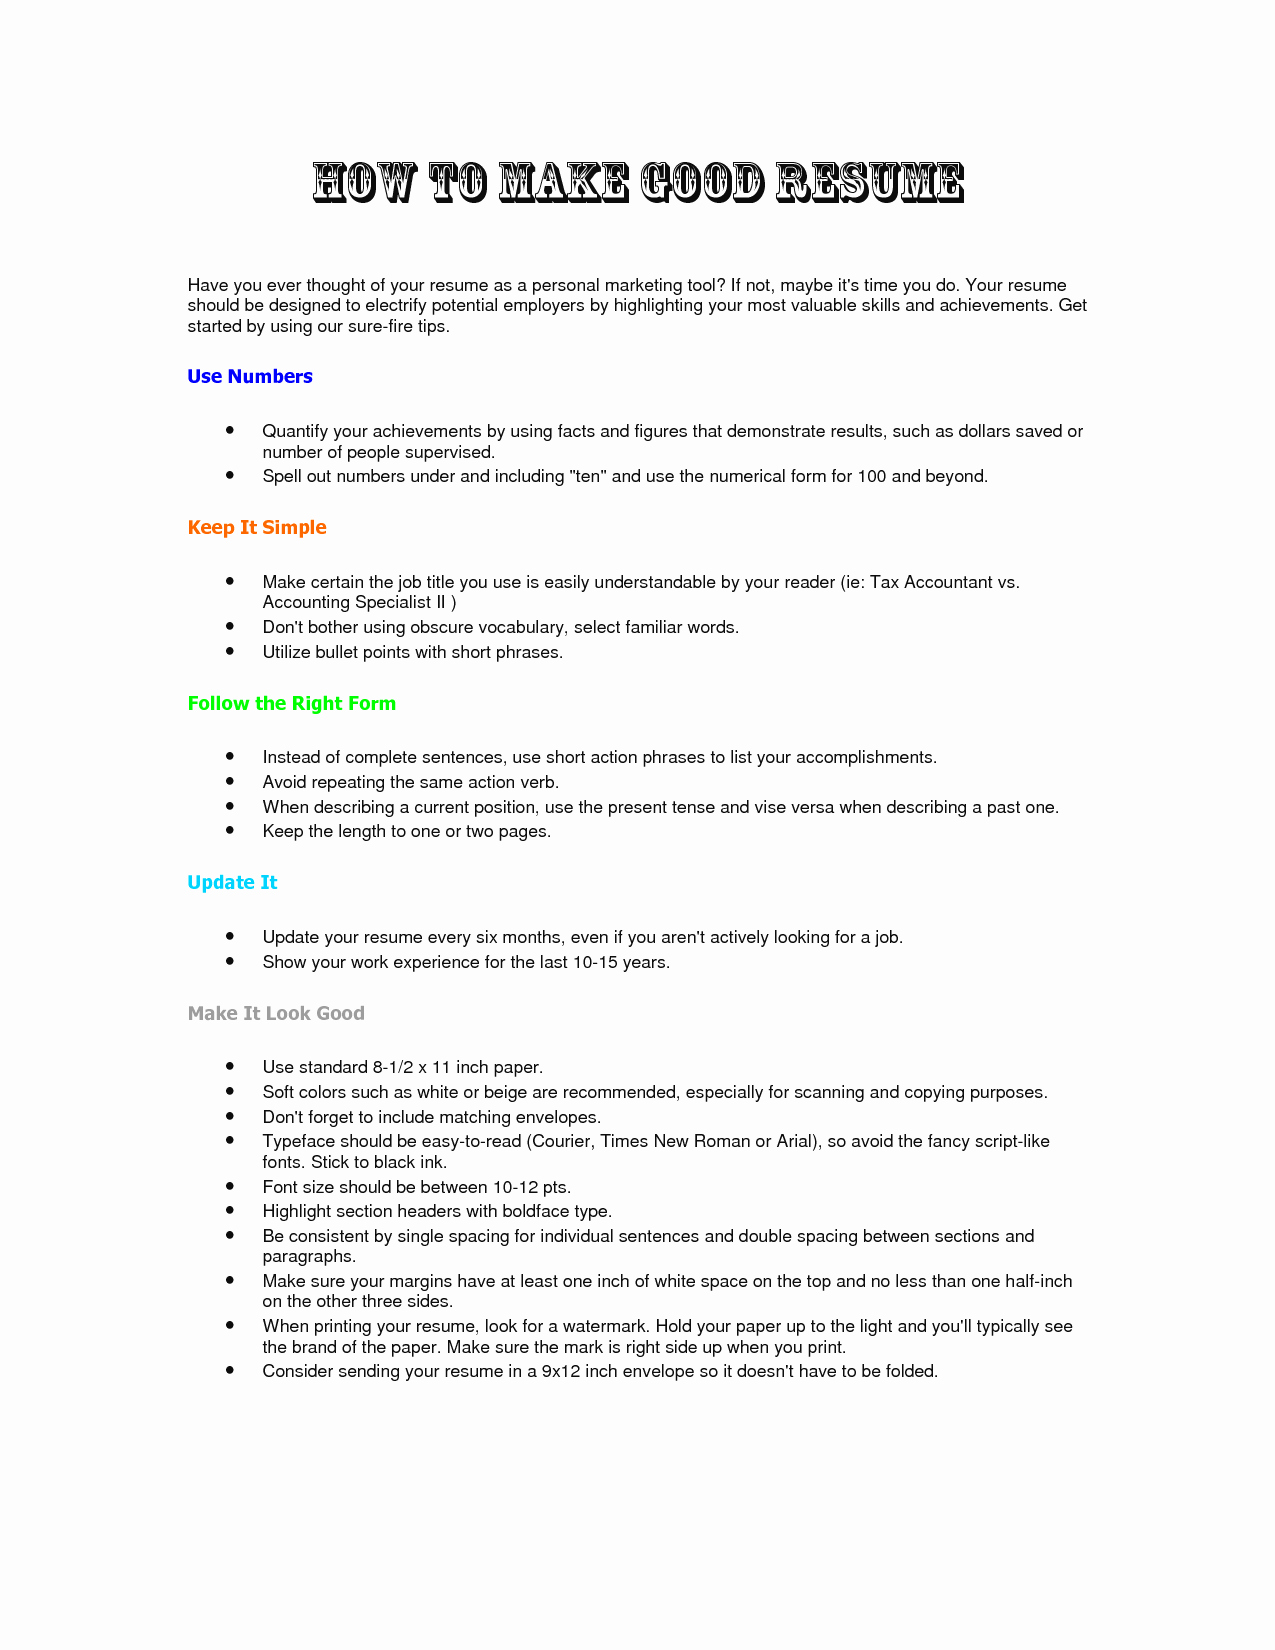 How to Make A Resume